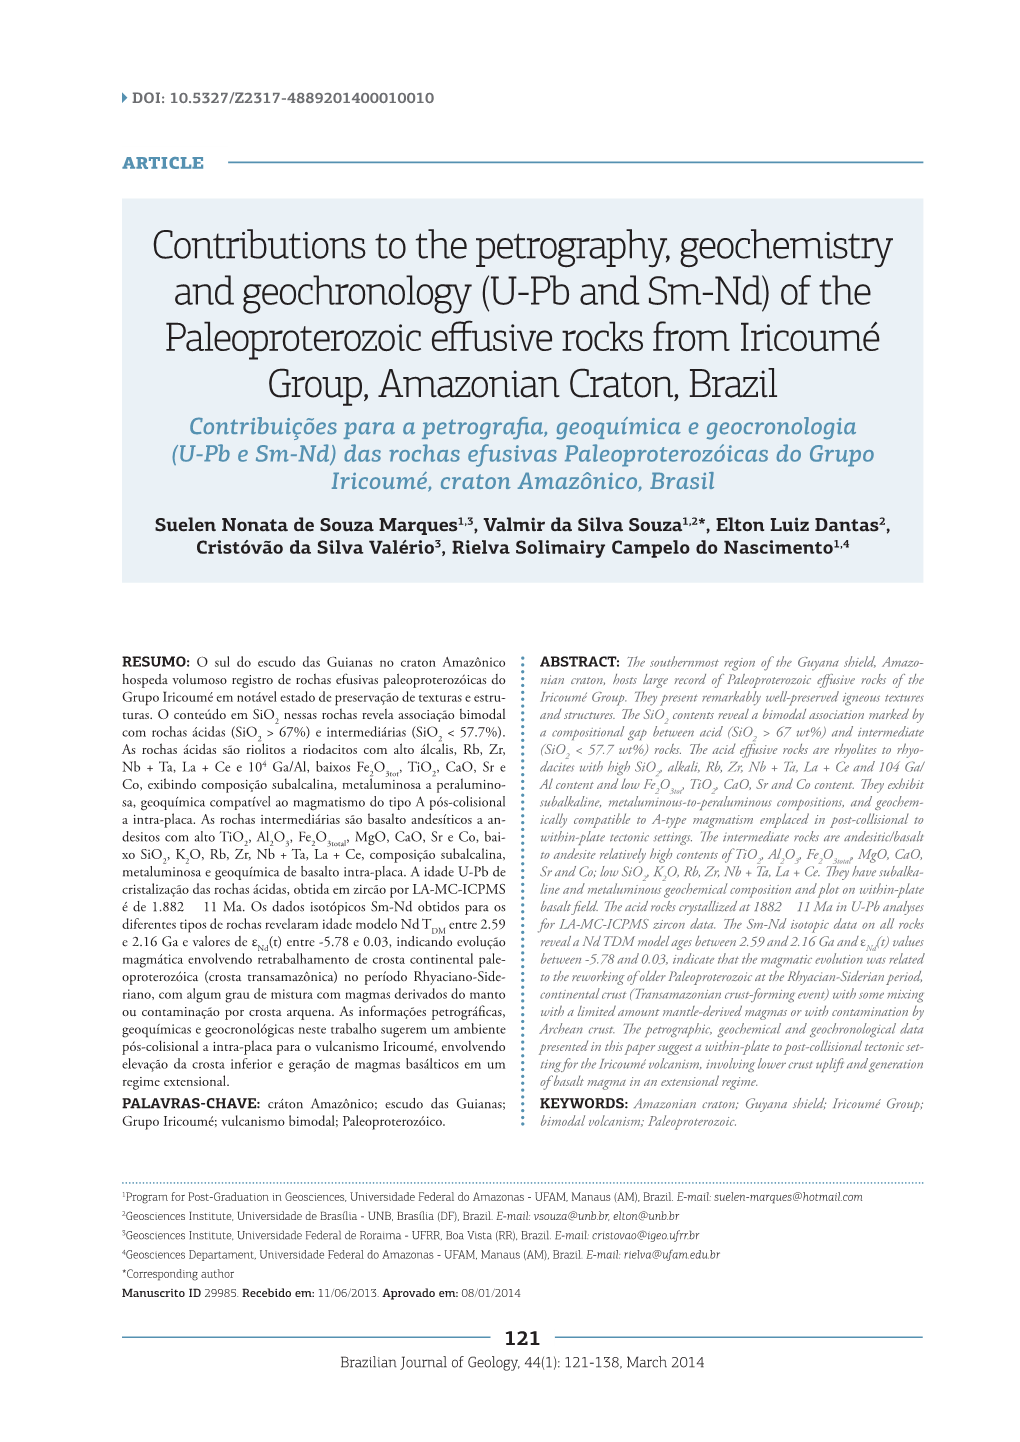 Contributions to the Petrography, Geochemistry and Geochronology